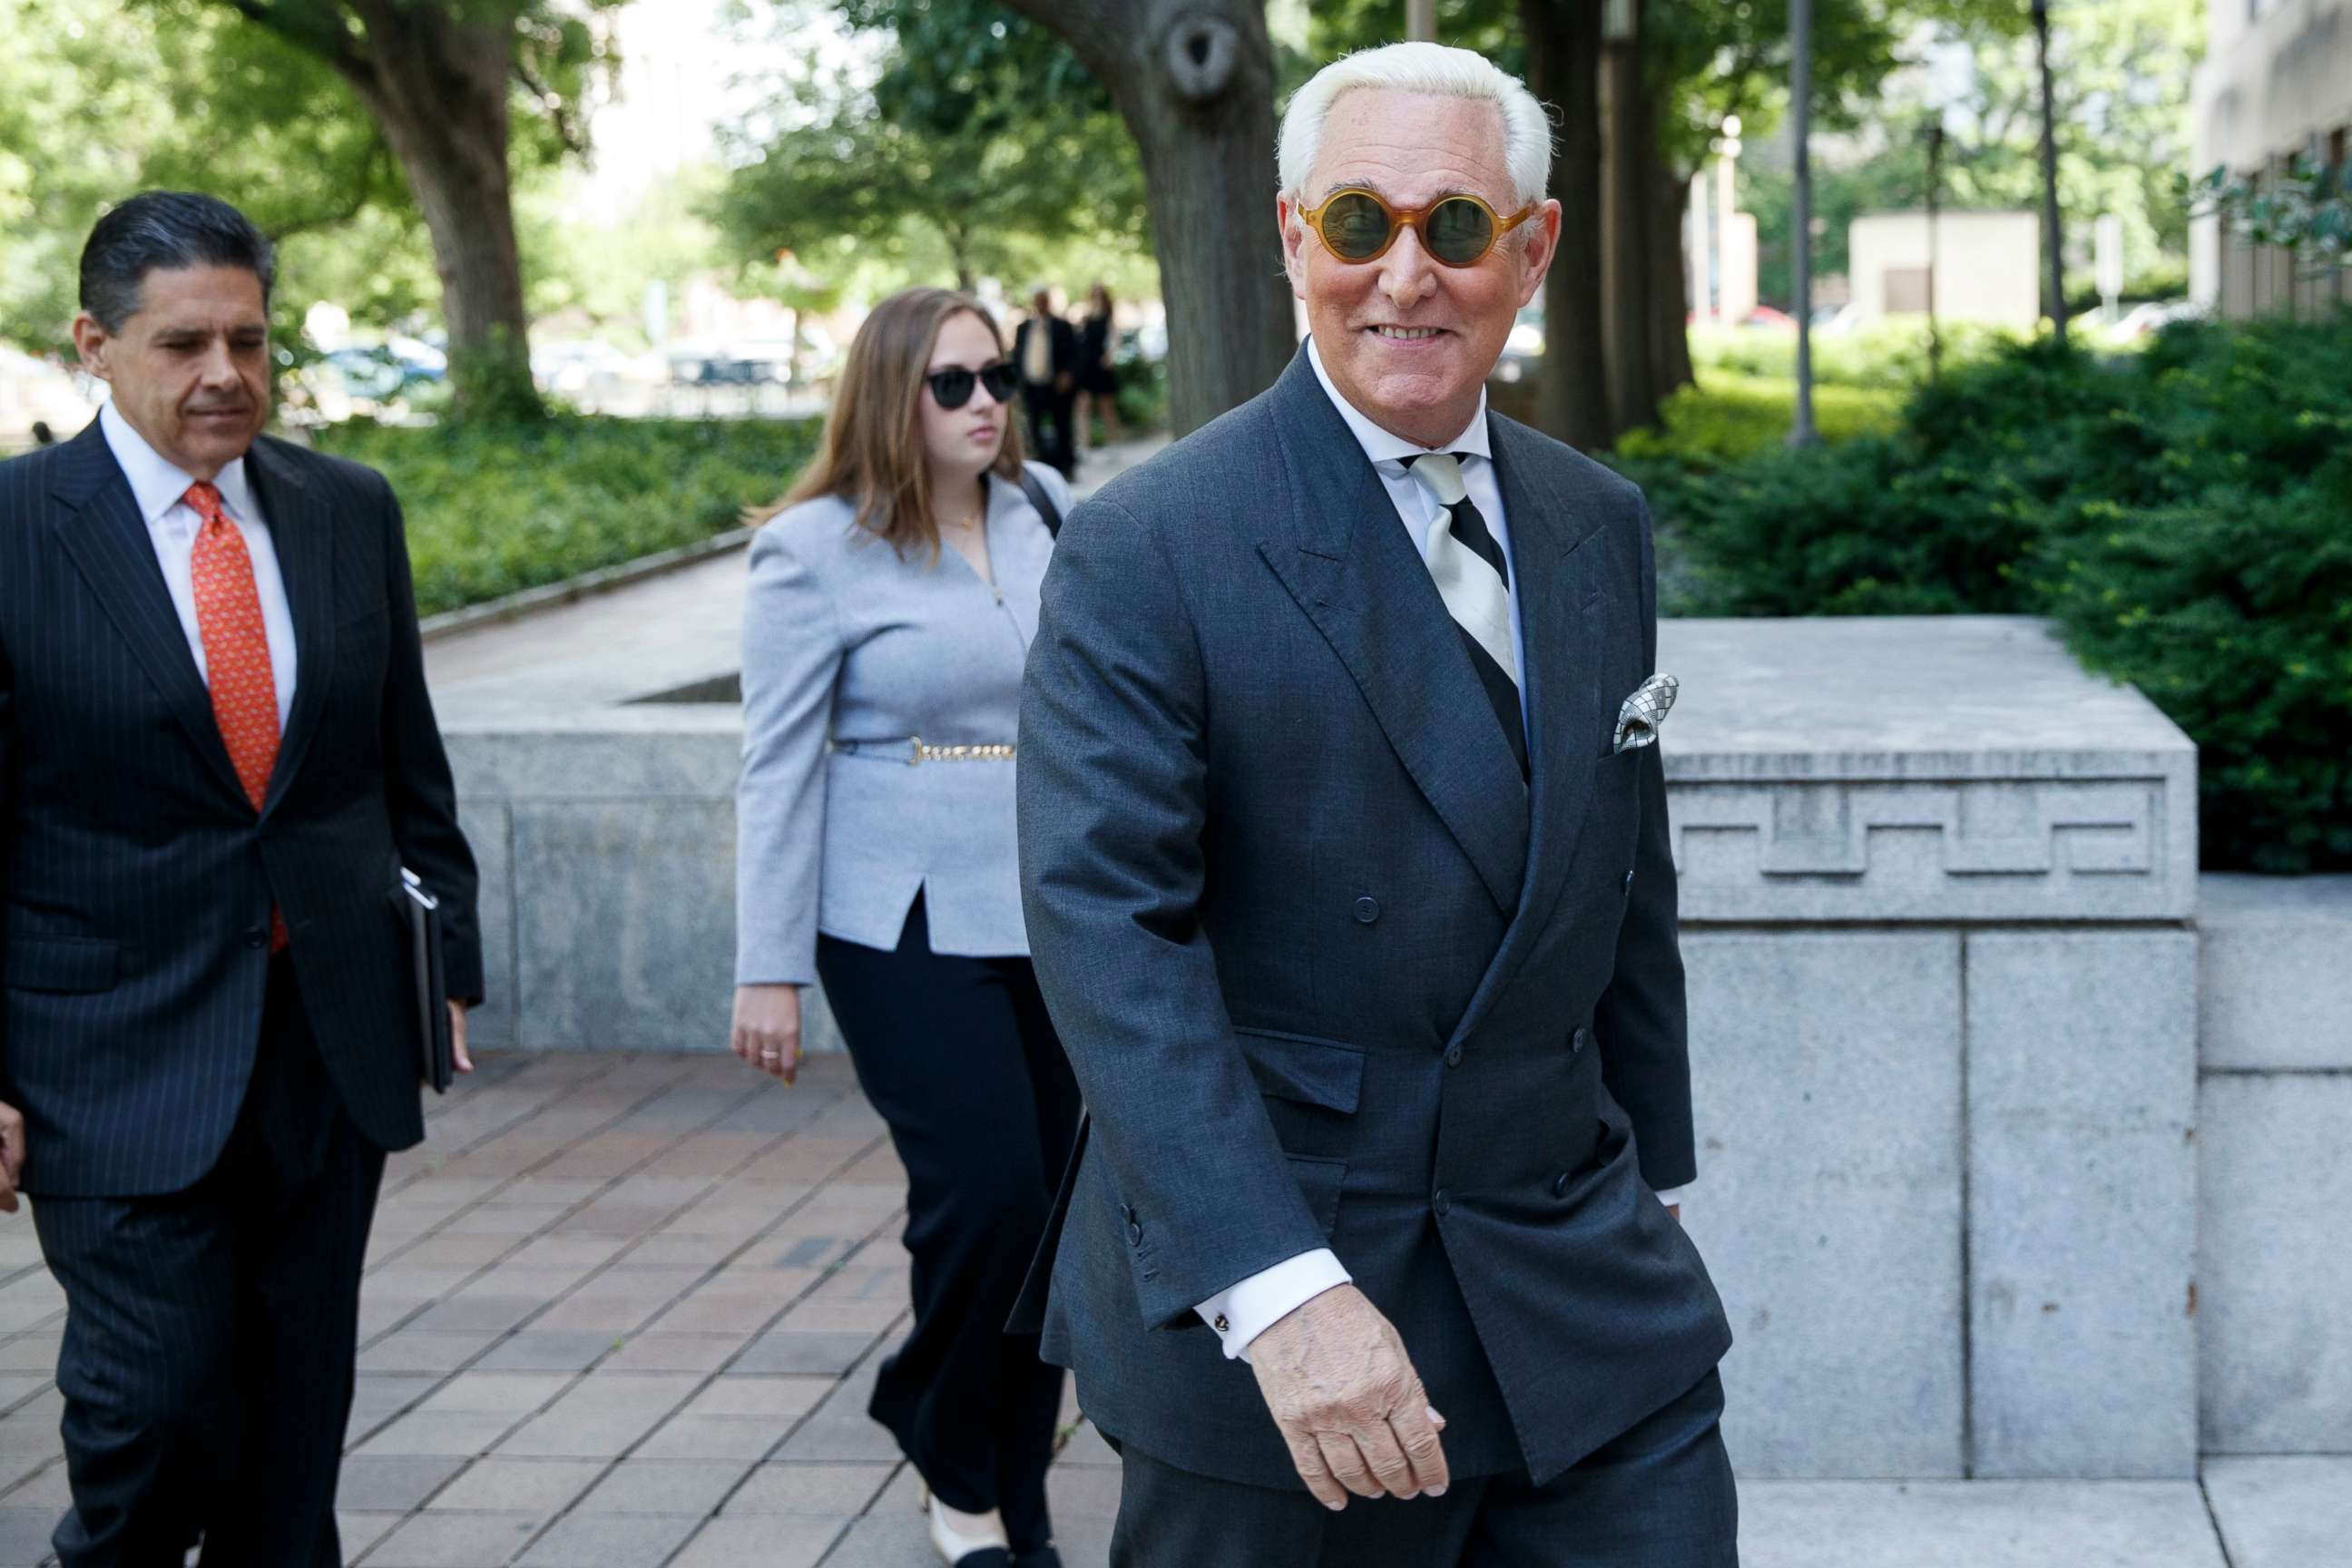 PHOTO: Roger Stone, former adviser to President Trump, arrives for a motion hearing at the D.C. Federal Court in Washington, May 30, 2019.